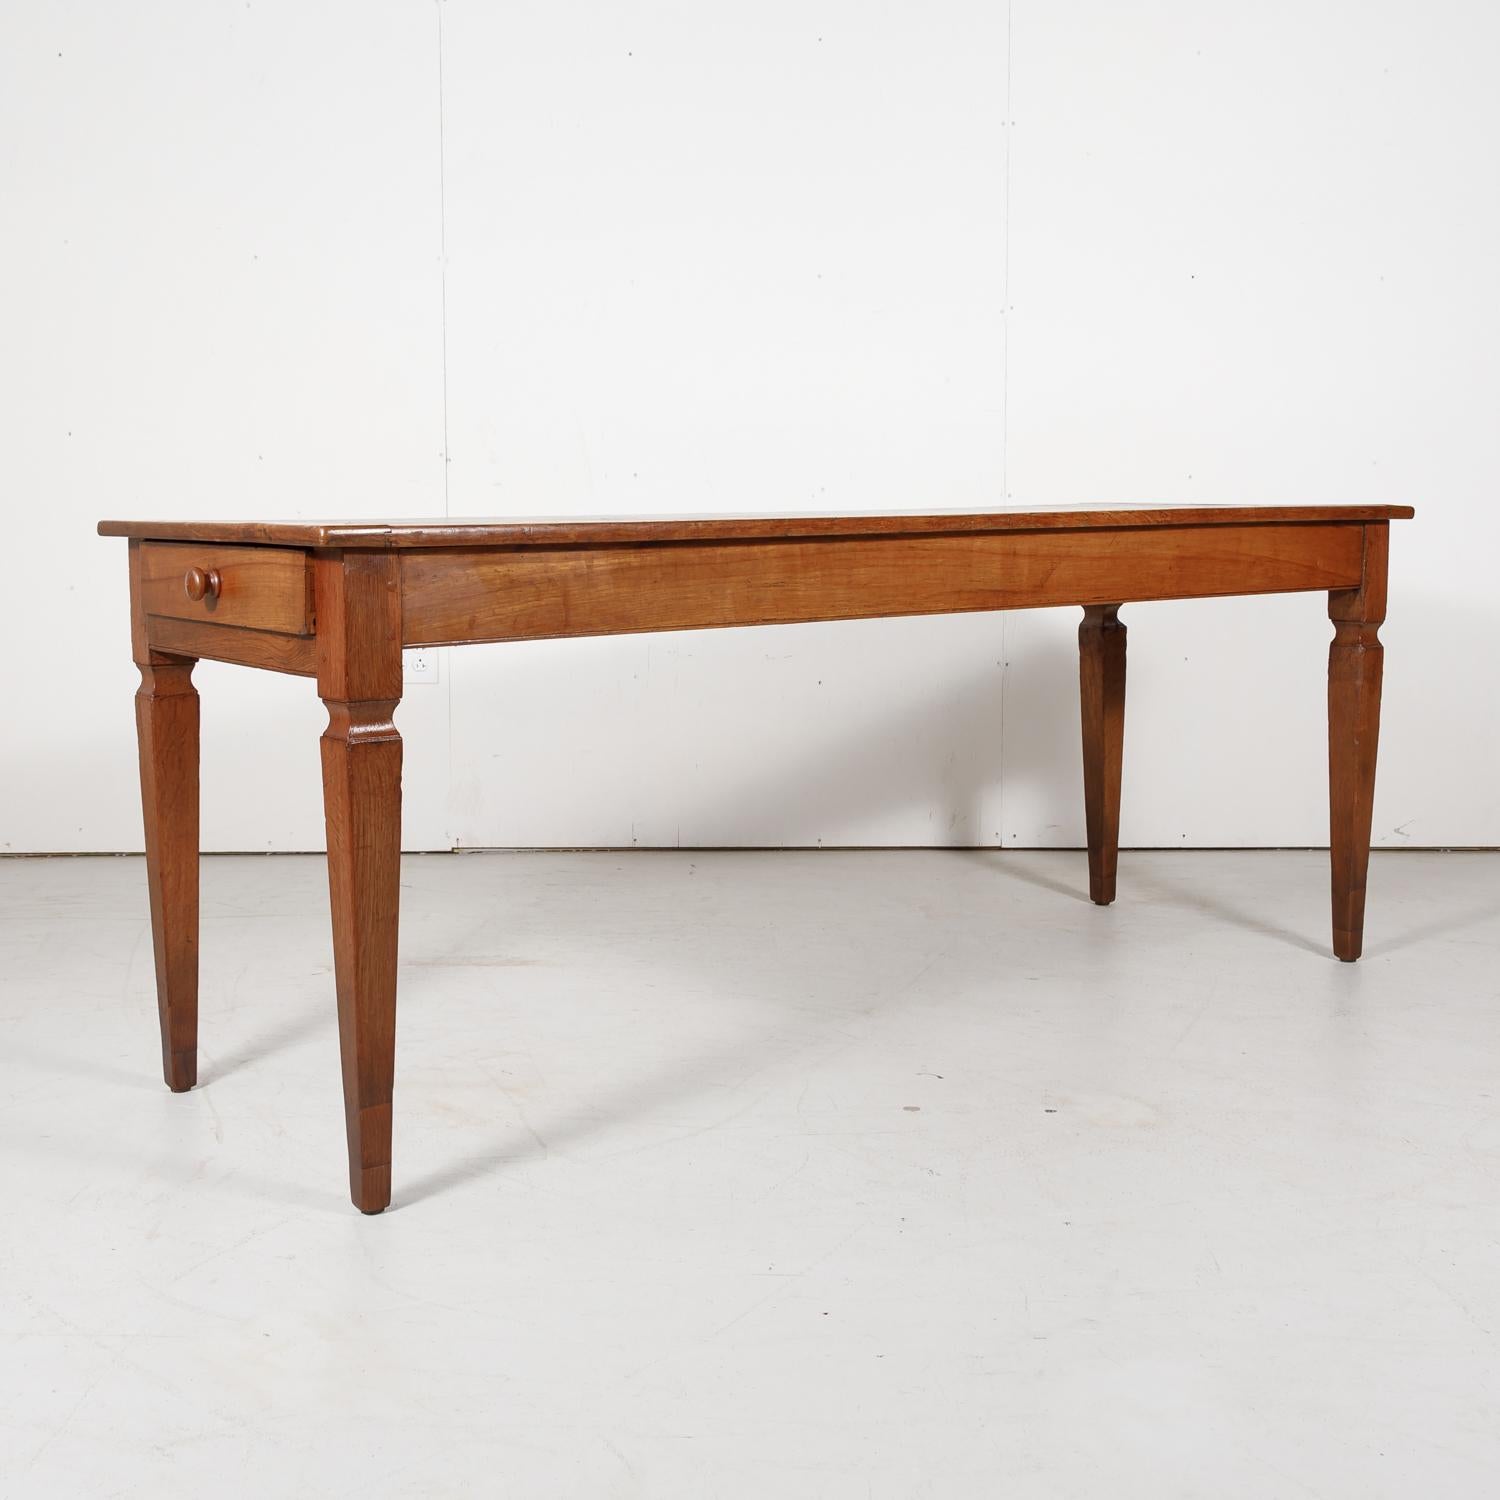 Mid-19th Century 19th Century French Louis XVI Style Cherry Farm Table or Console with Drawer